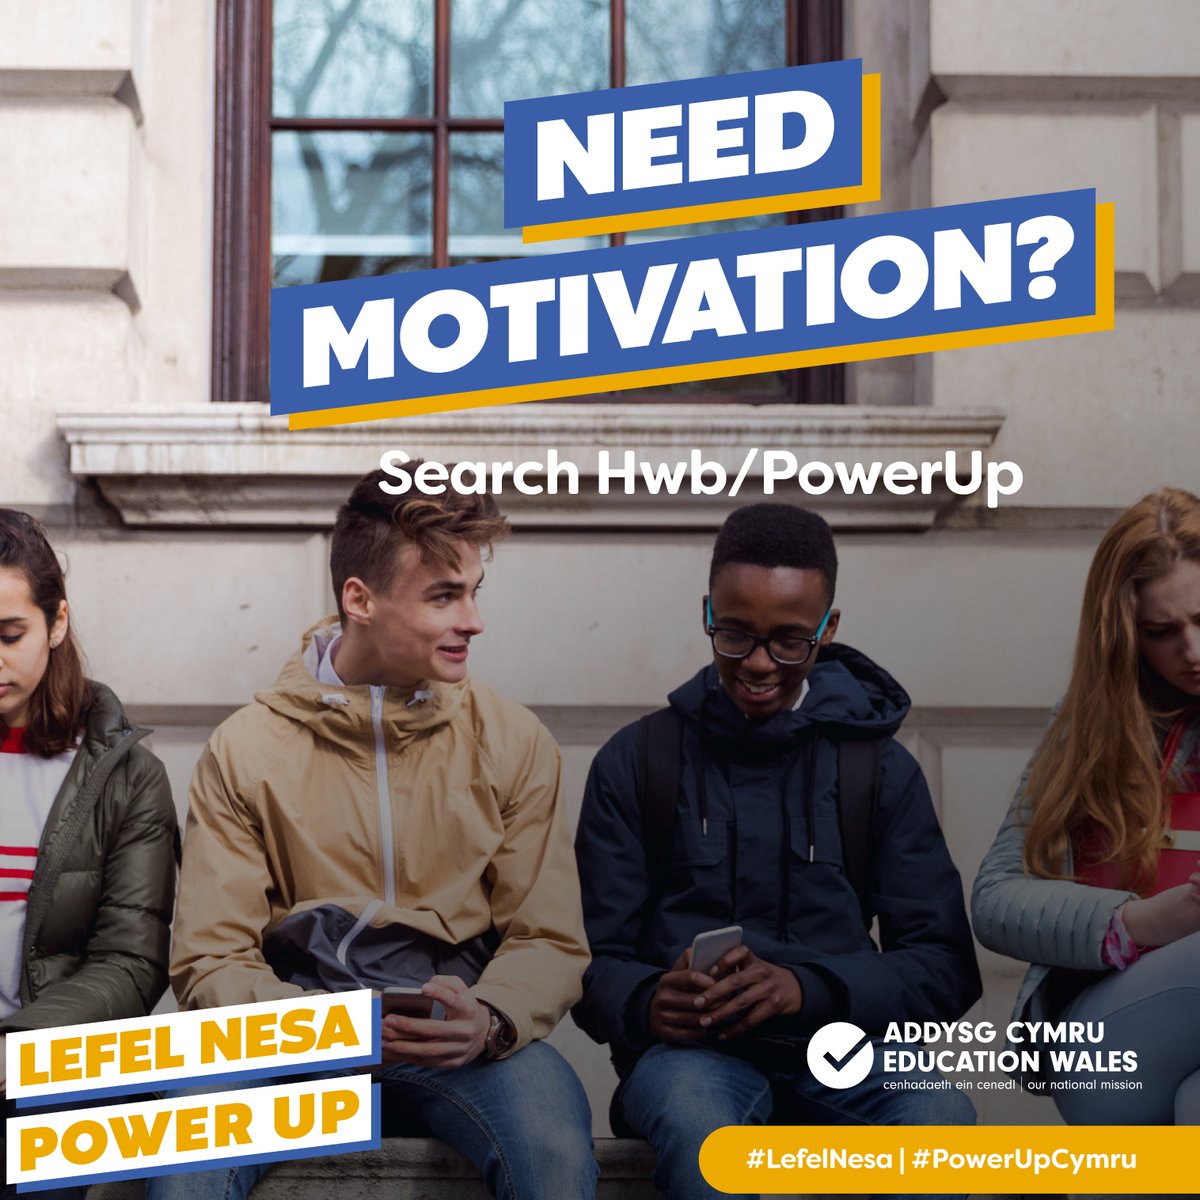 If you’re feeling nervous about your exams or assessments, remember that you’re not alone. There’s plenty of help and support available. Visit gov.wales/power-up-wales #PowerUpCymru